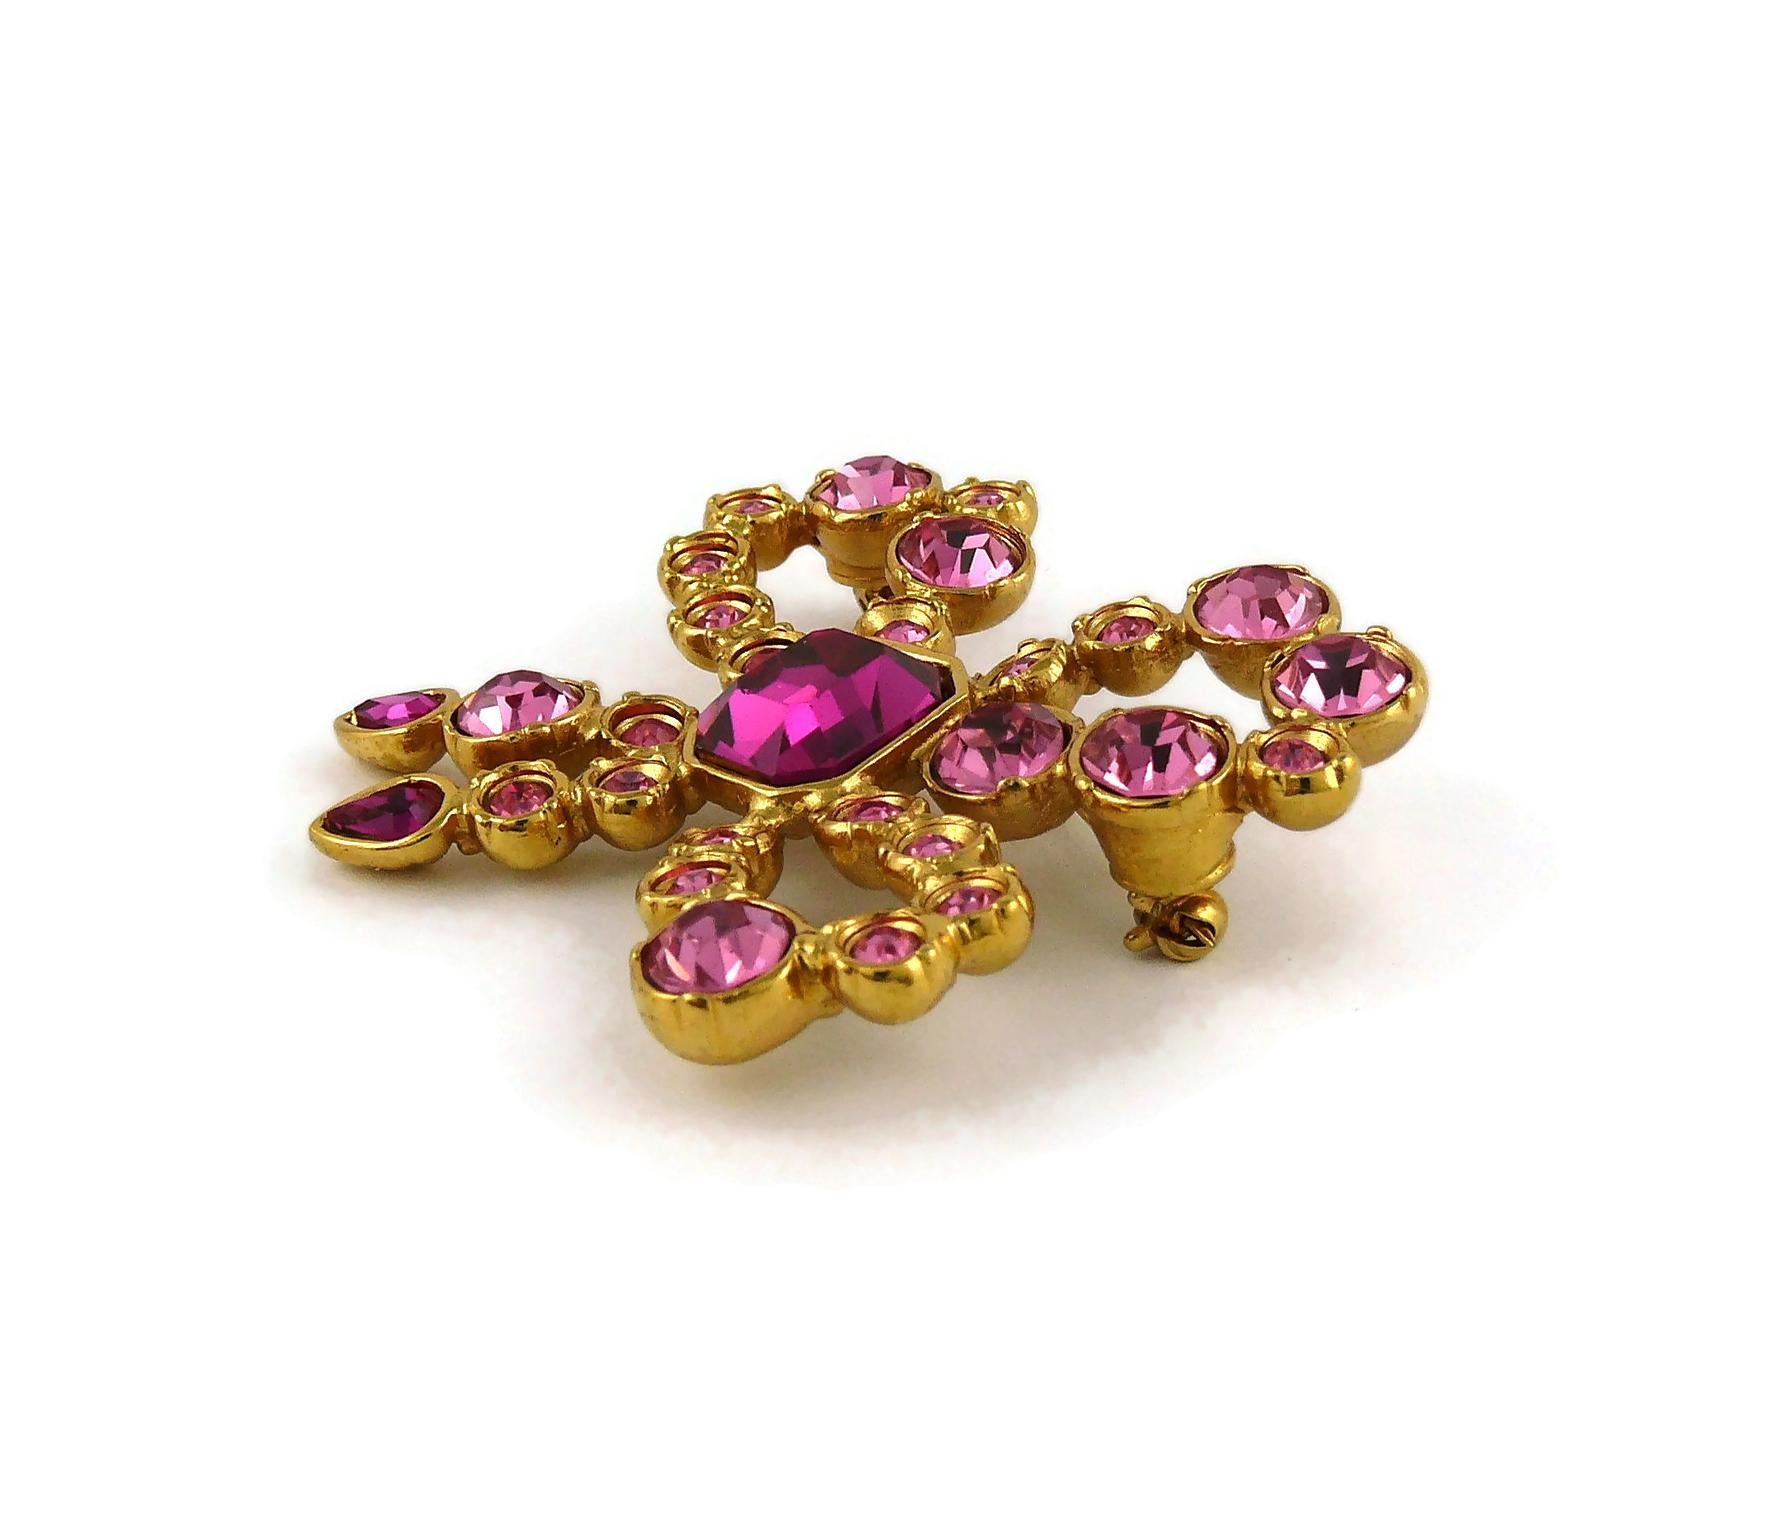 Yves Saint Laurent YSL Vintage Jeweled Bow Brooch For Sale 2